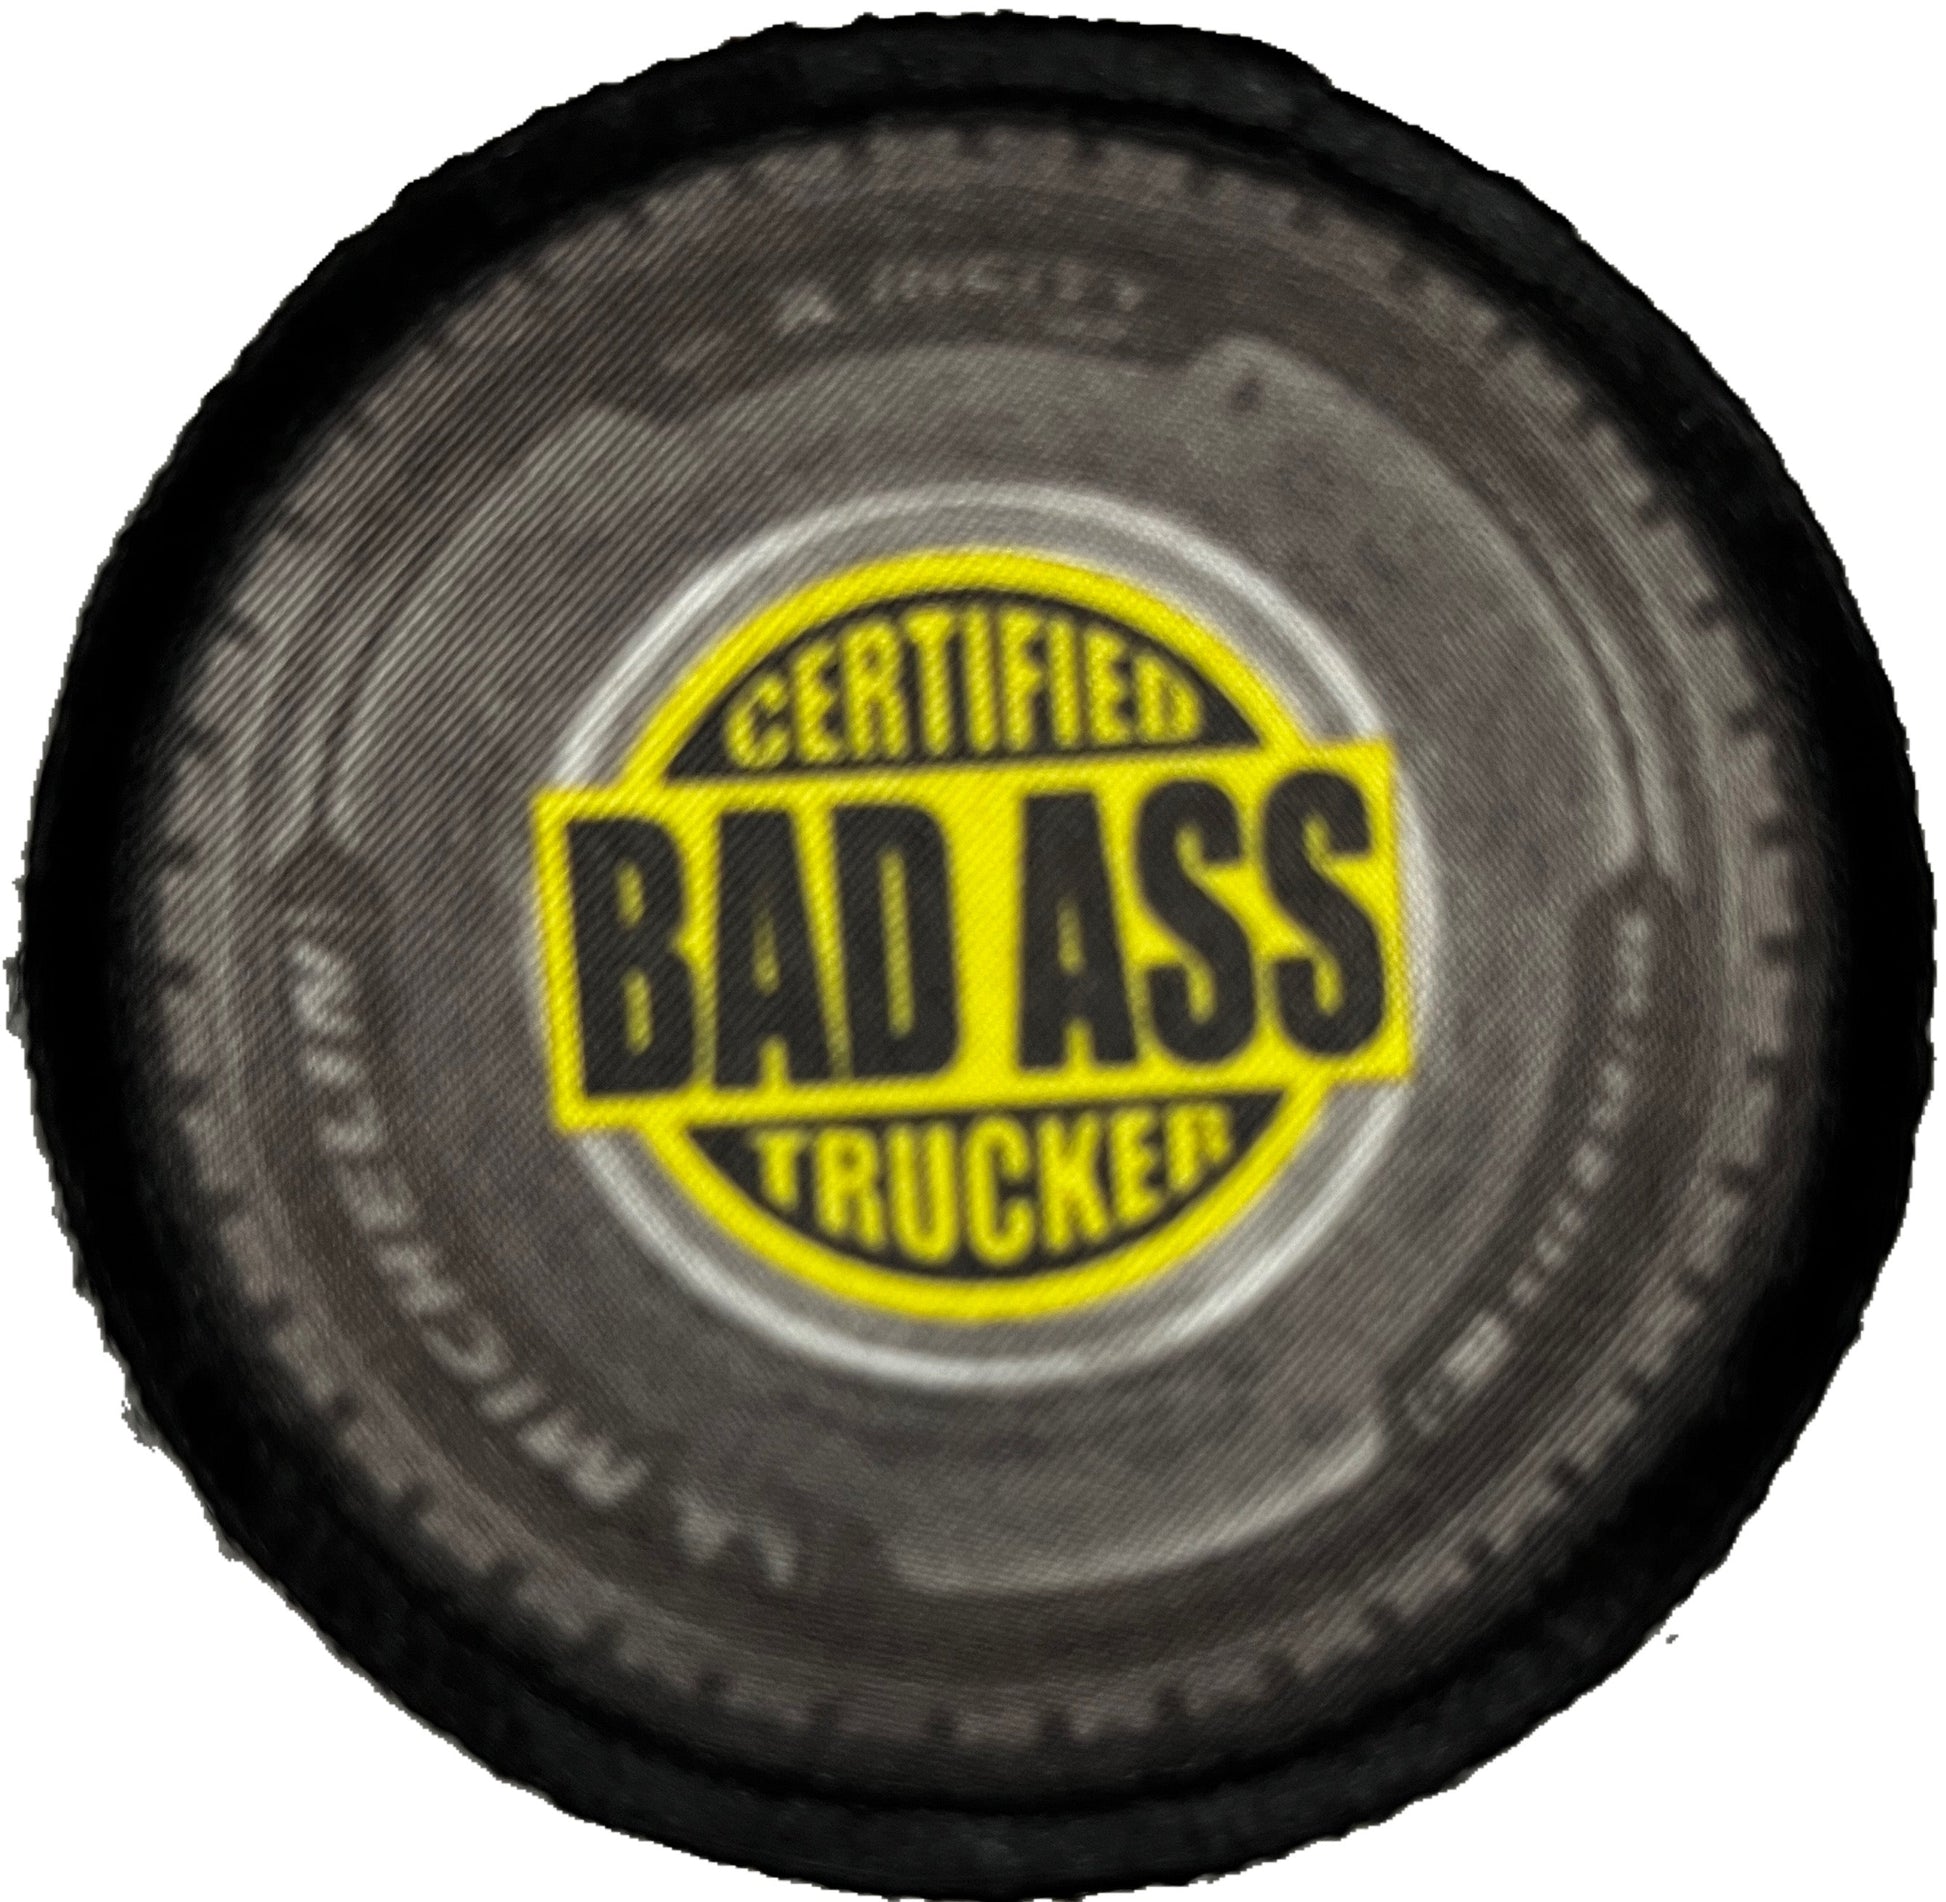 3" Certified Badass Trucker Morale Patch Morale Patches Redheaded T Shirts 